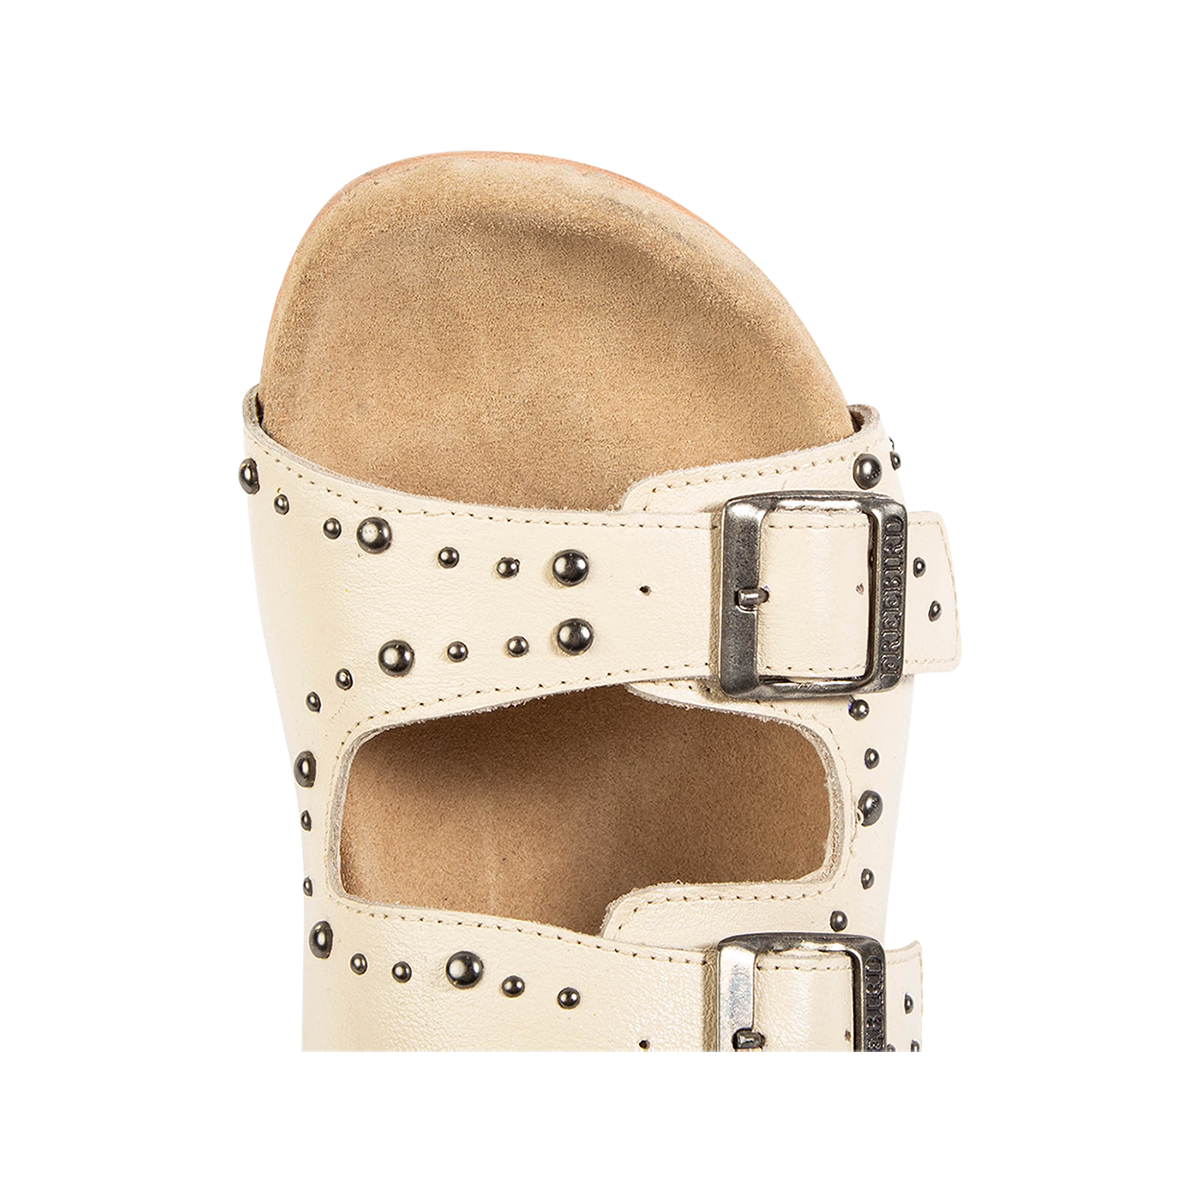 Top view showing a rounded exposed toe bed on FREEBIRD women's Asher bone sandal